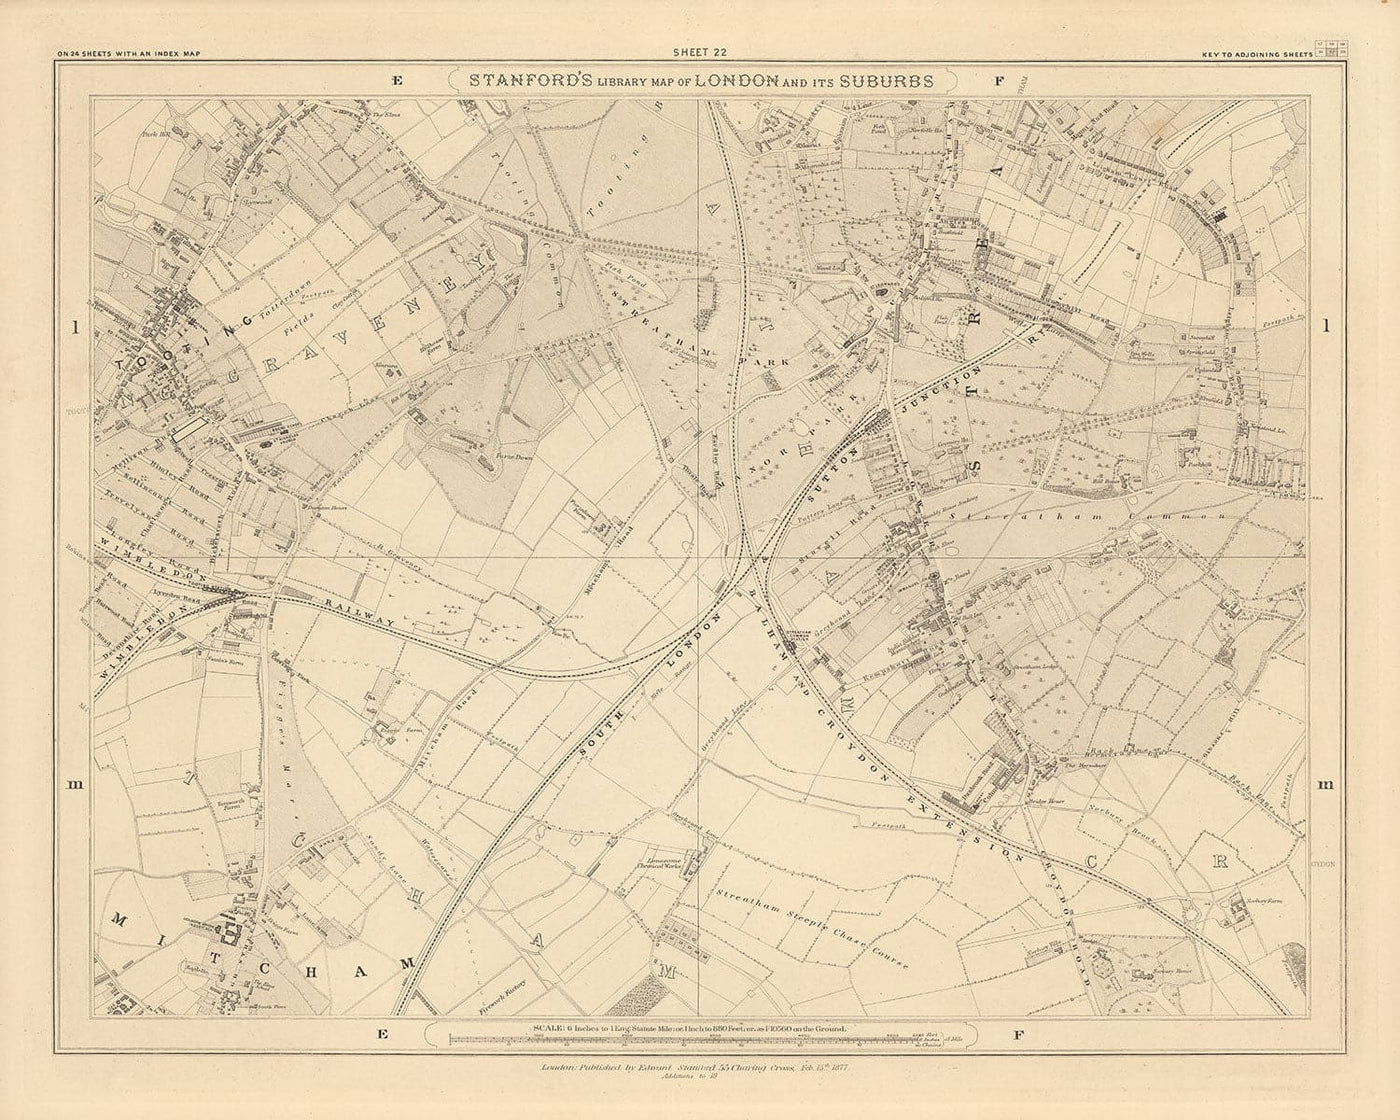 Old Map of South London in 1862 by Edward Stanford - Streatham, Tooting, Mitcham, Norbury - SW17, SW16, CR4